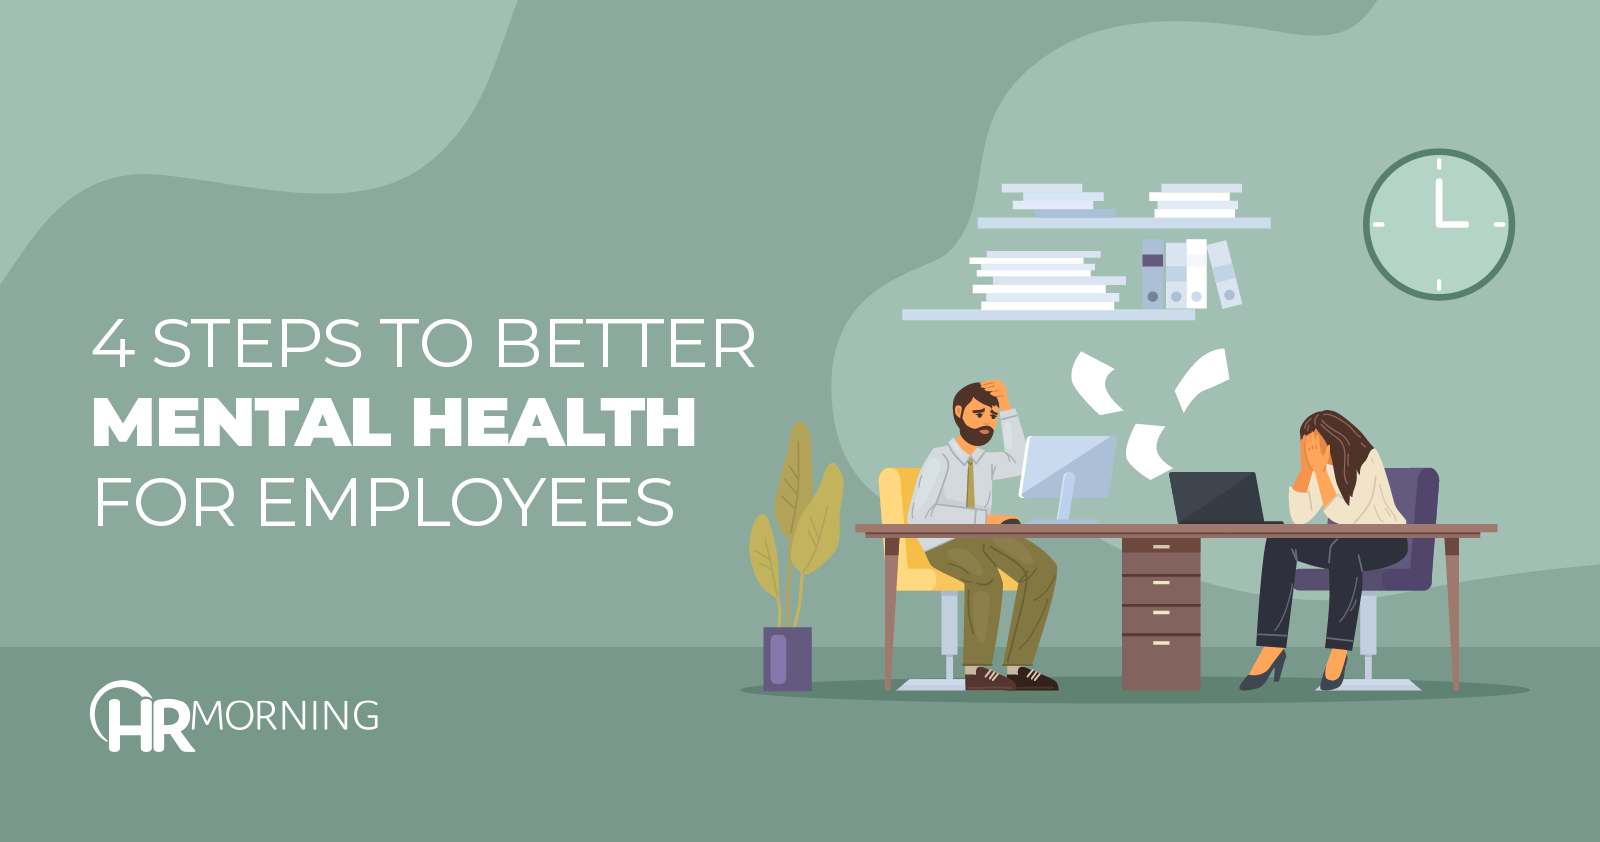 4 Steps To Better Mental Health For Employees